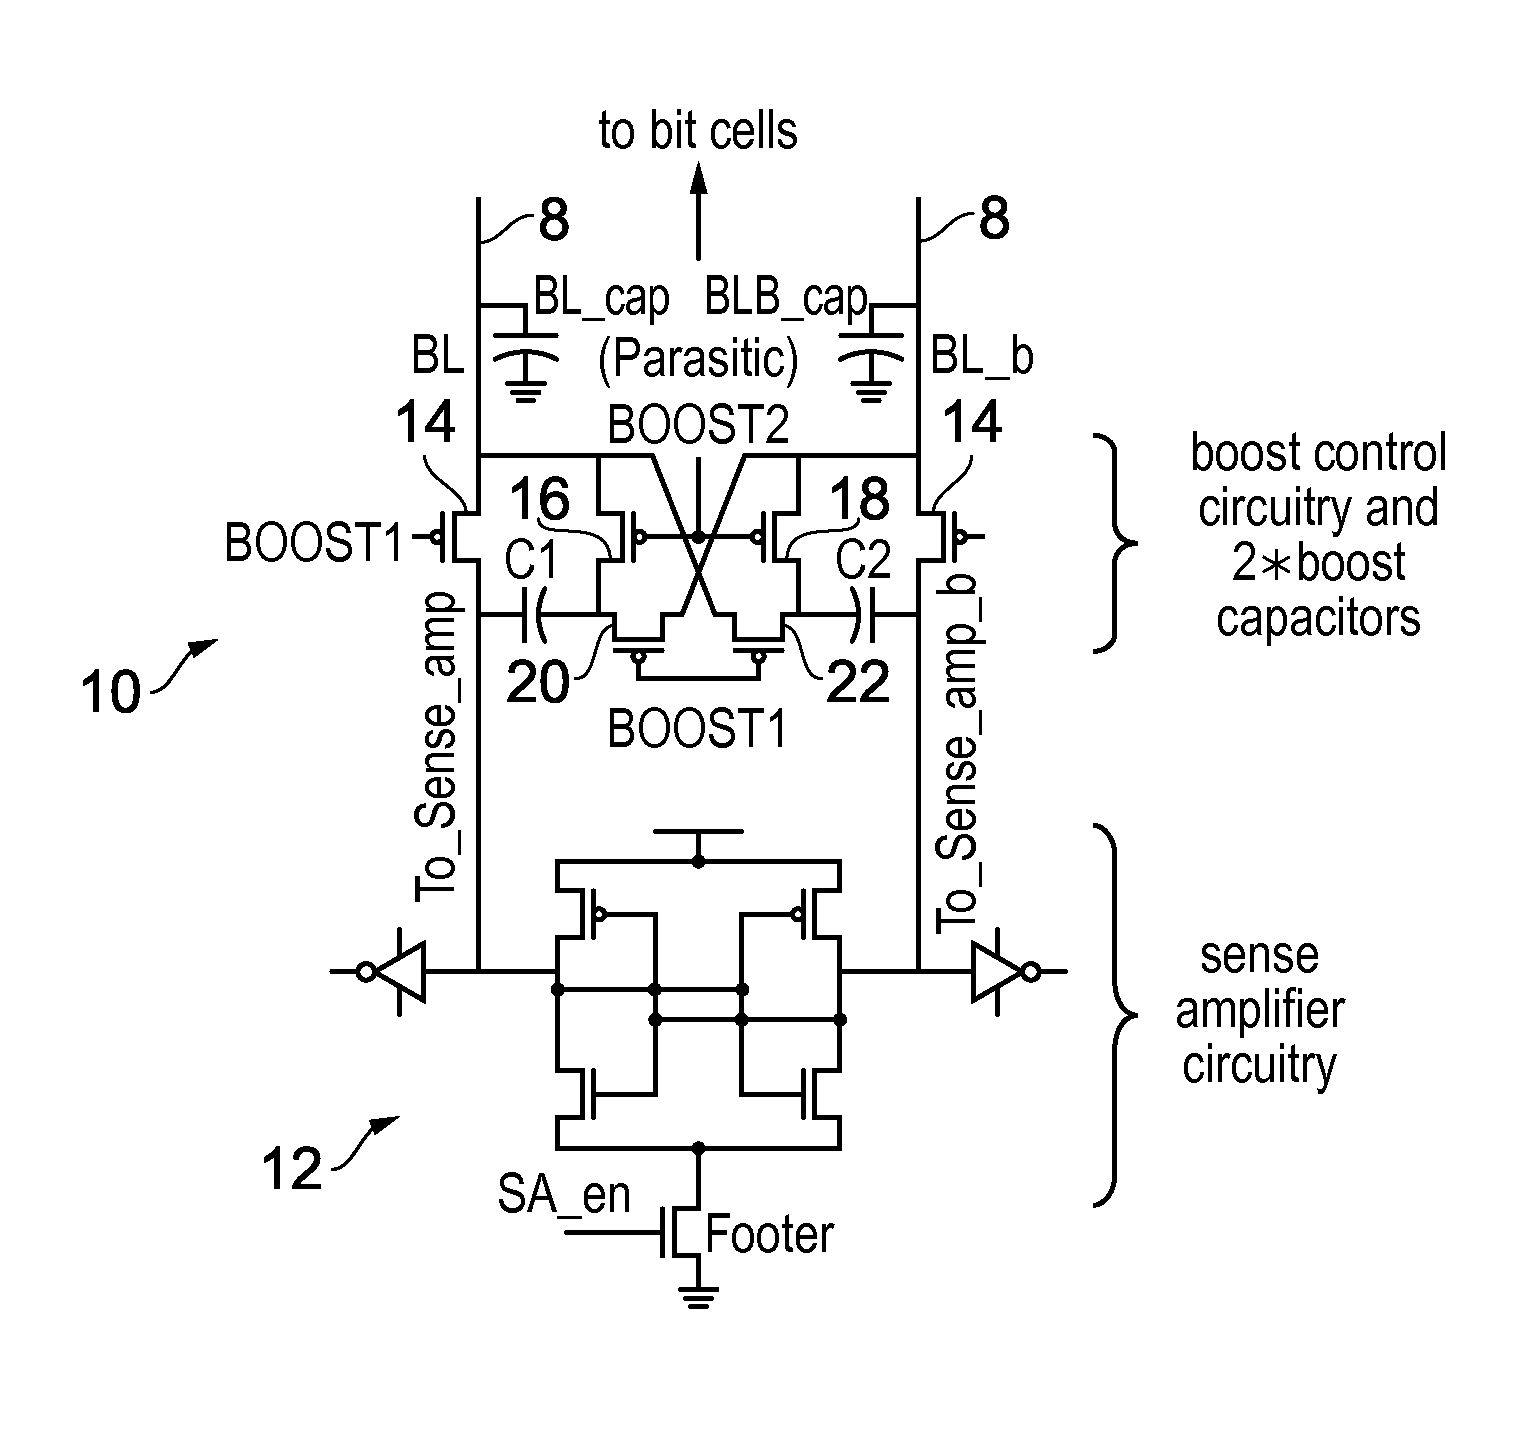 Memory circuitry including read voltage boost